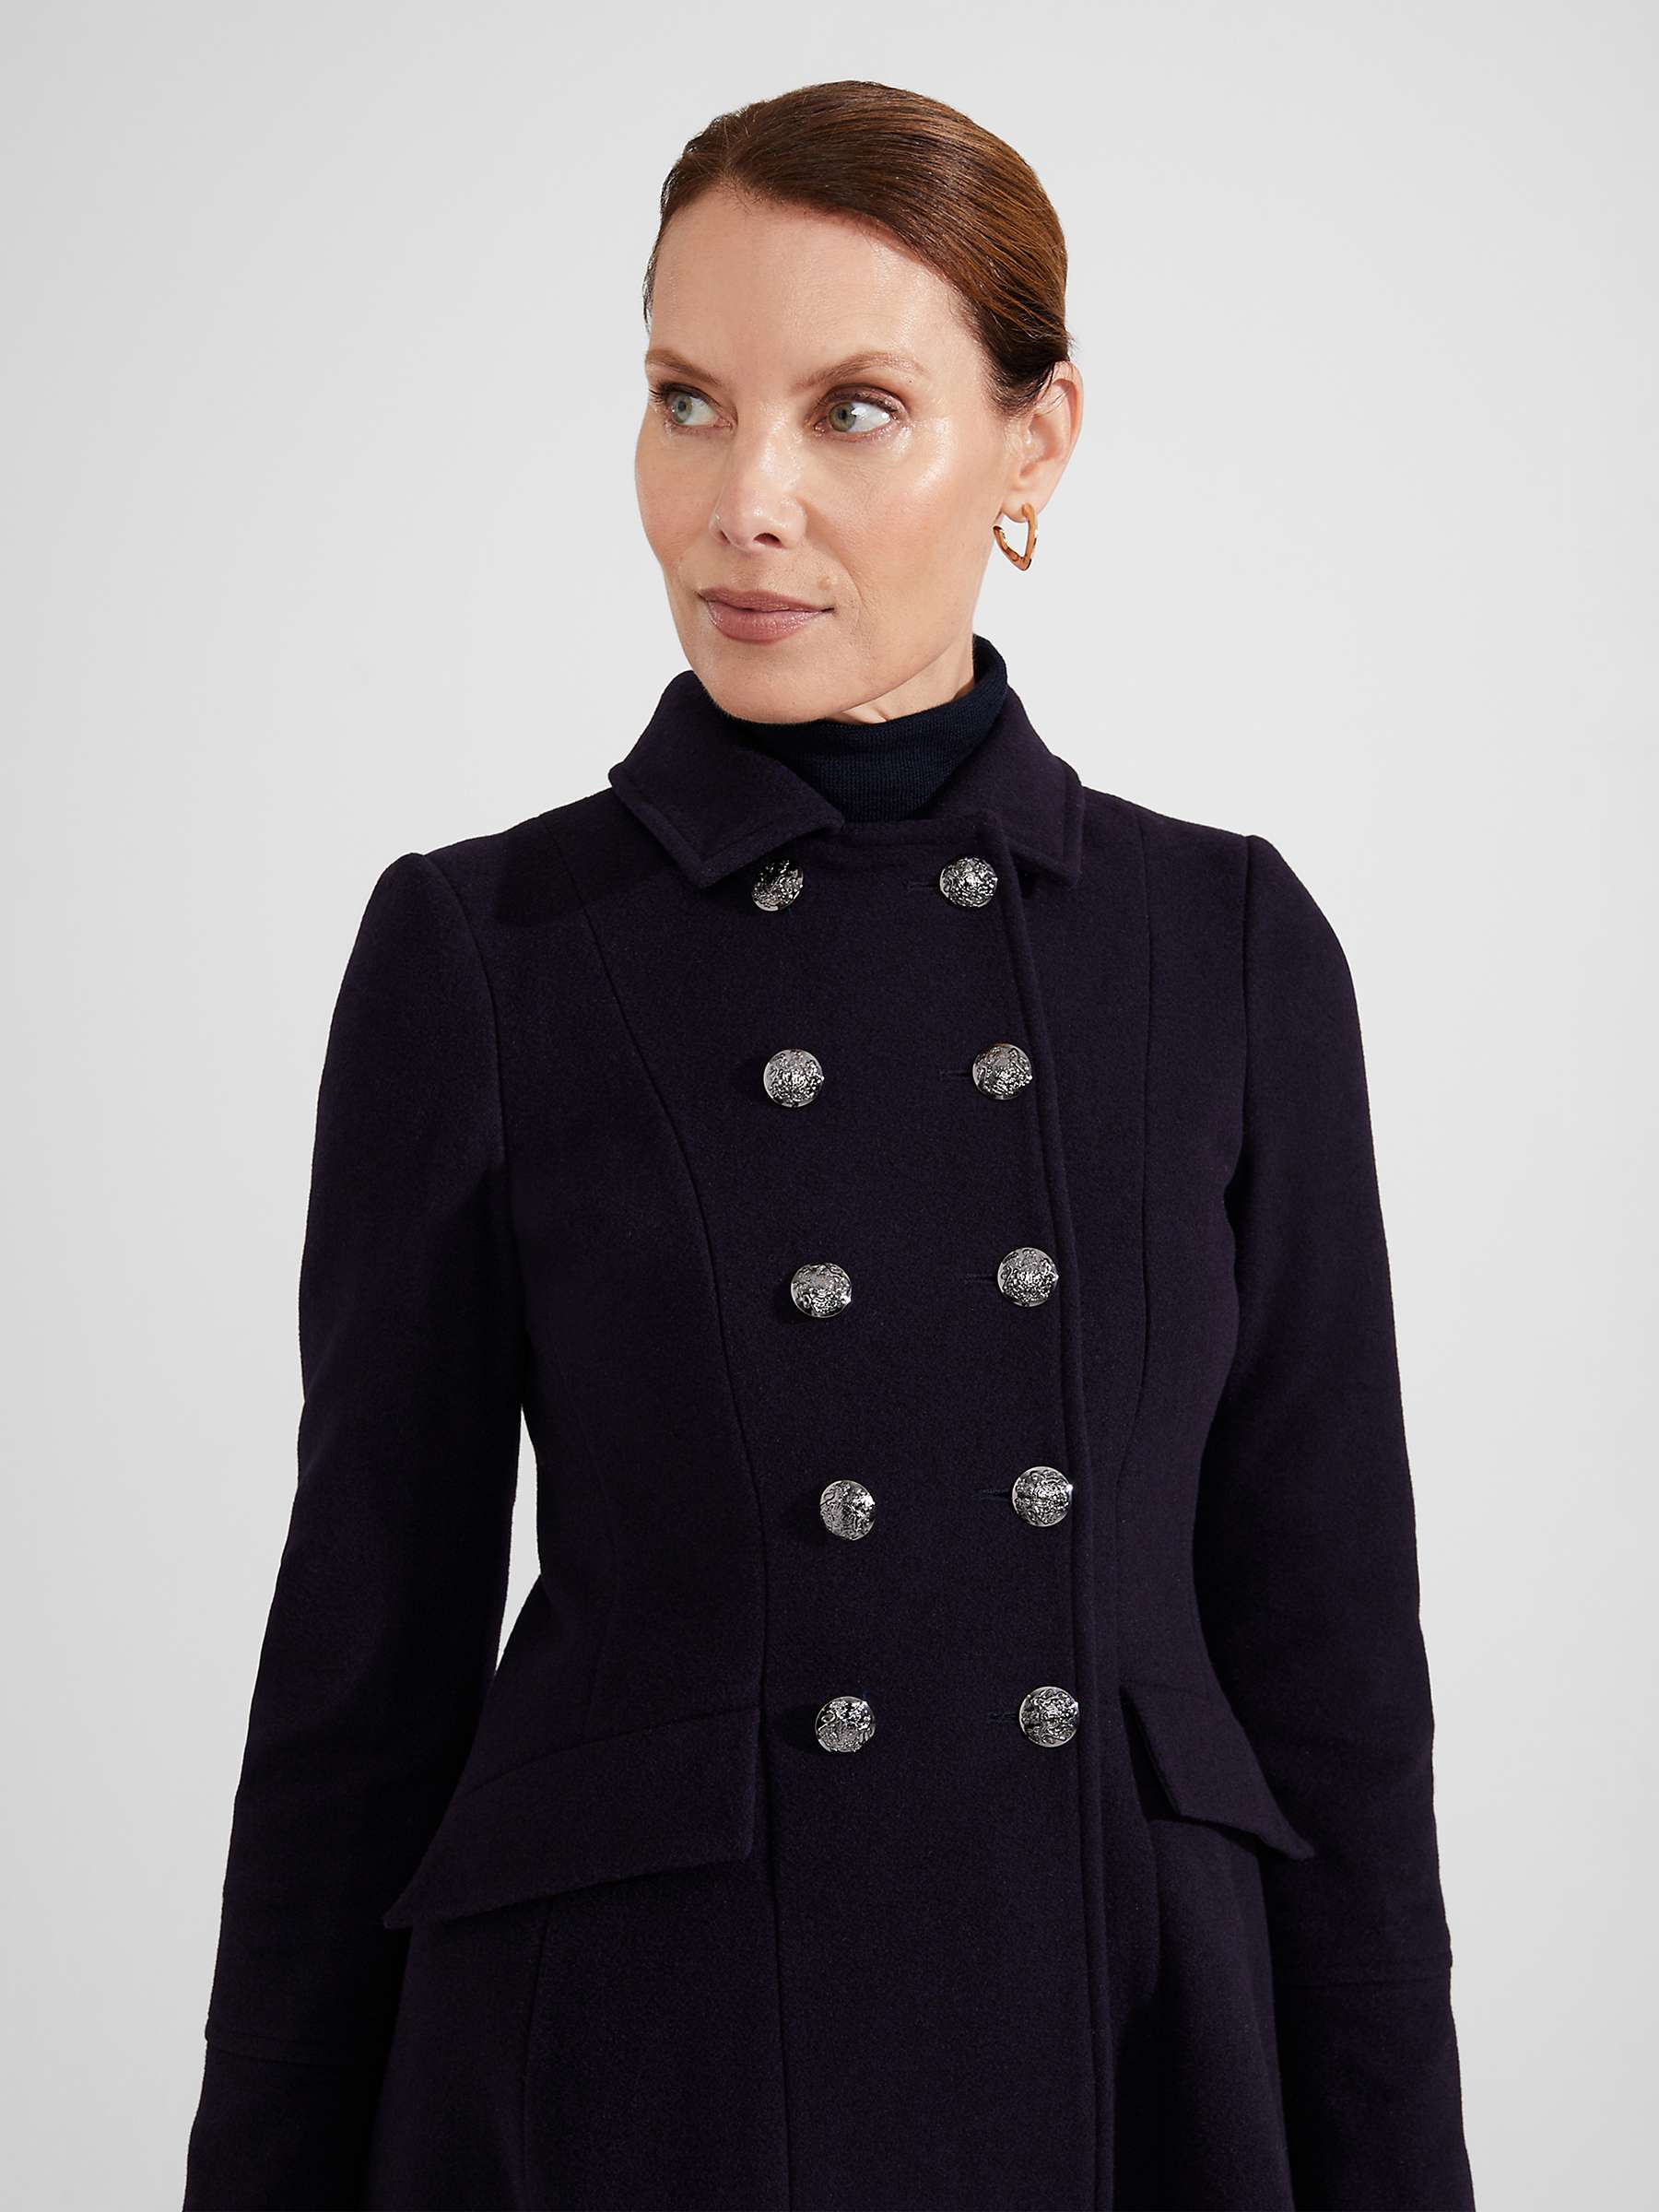 Buy Hobbs Clarisse Wool and Cashmere Blend Coat, Navy Online at johnlewis.com